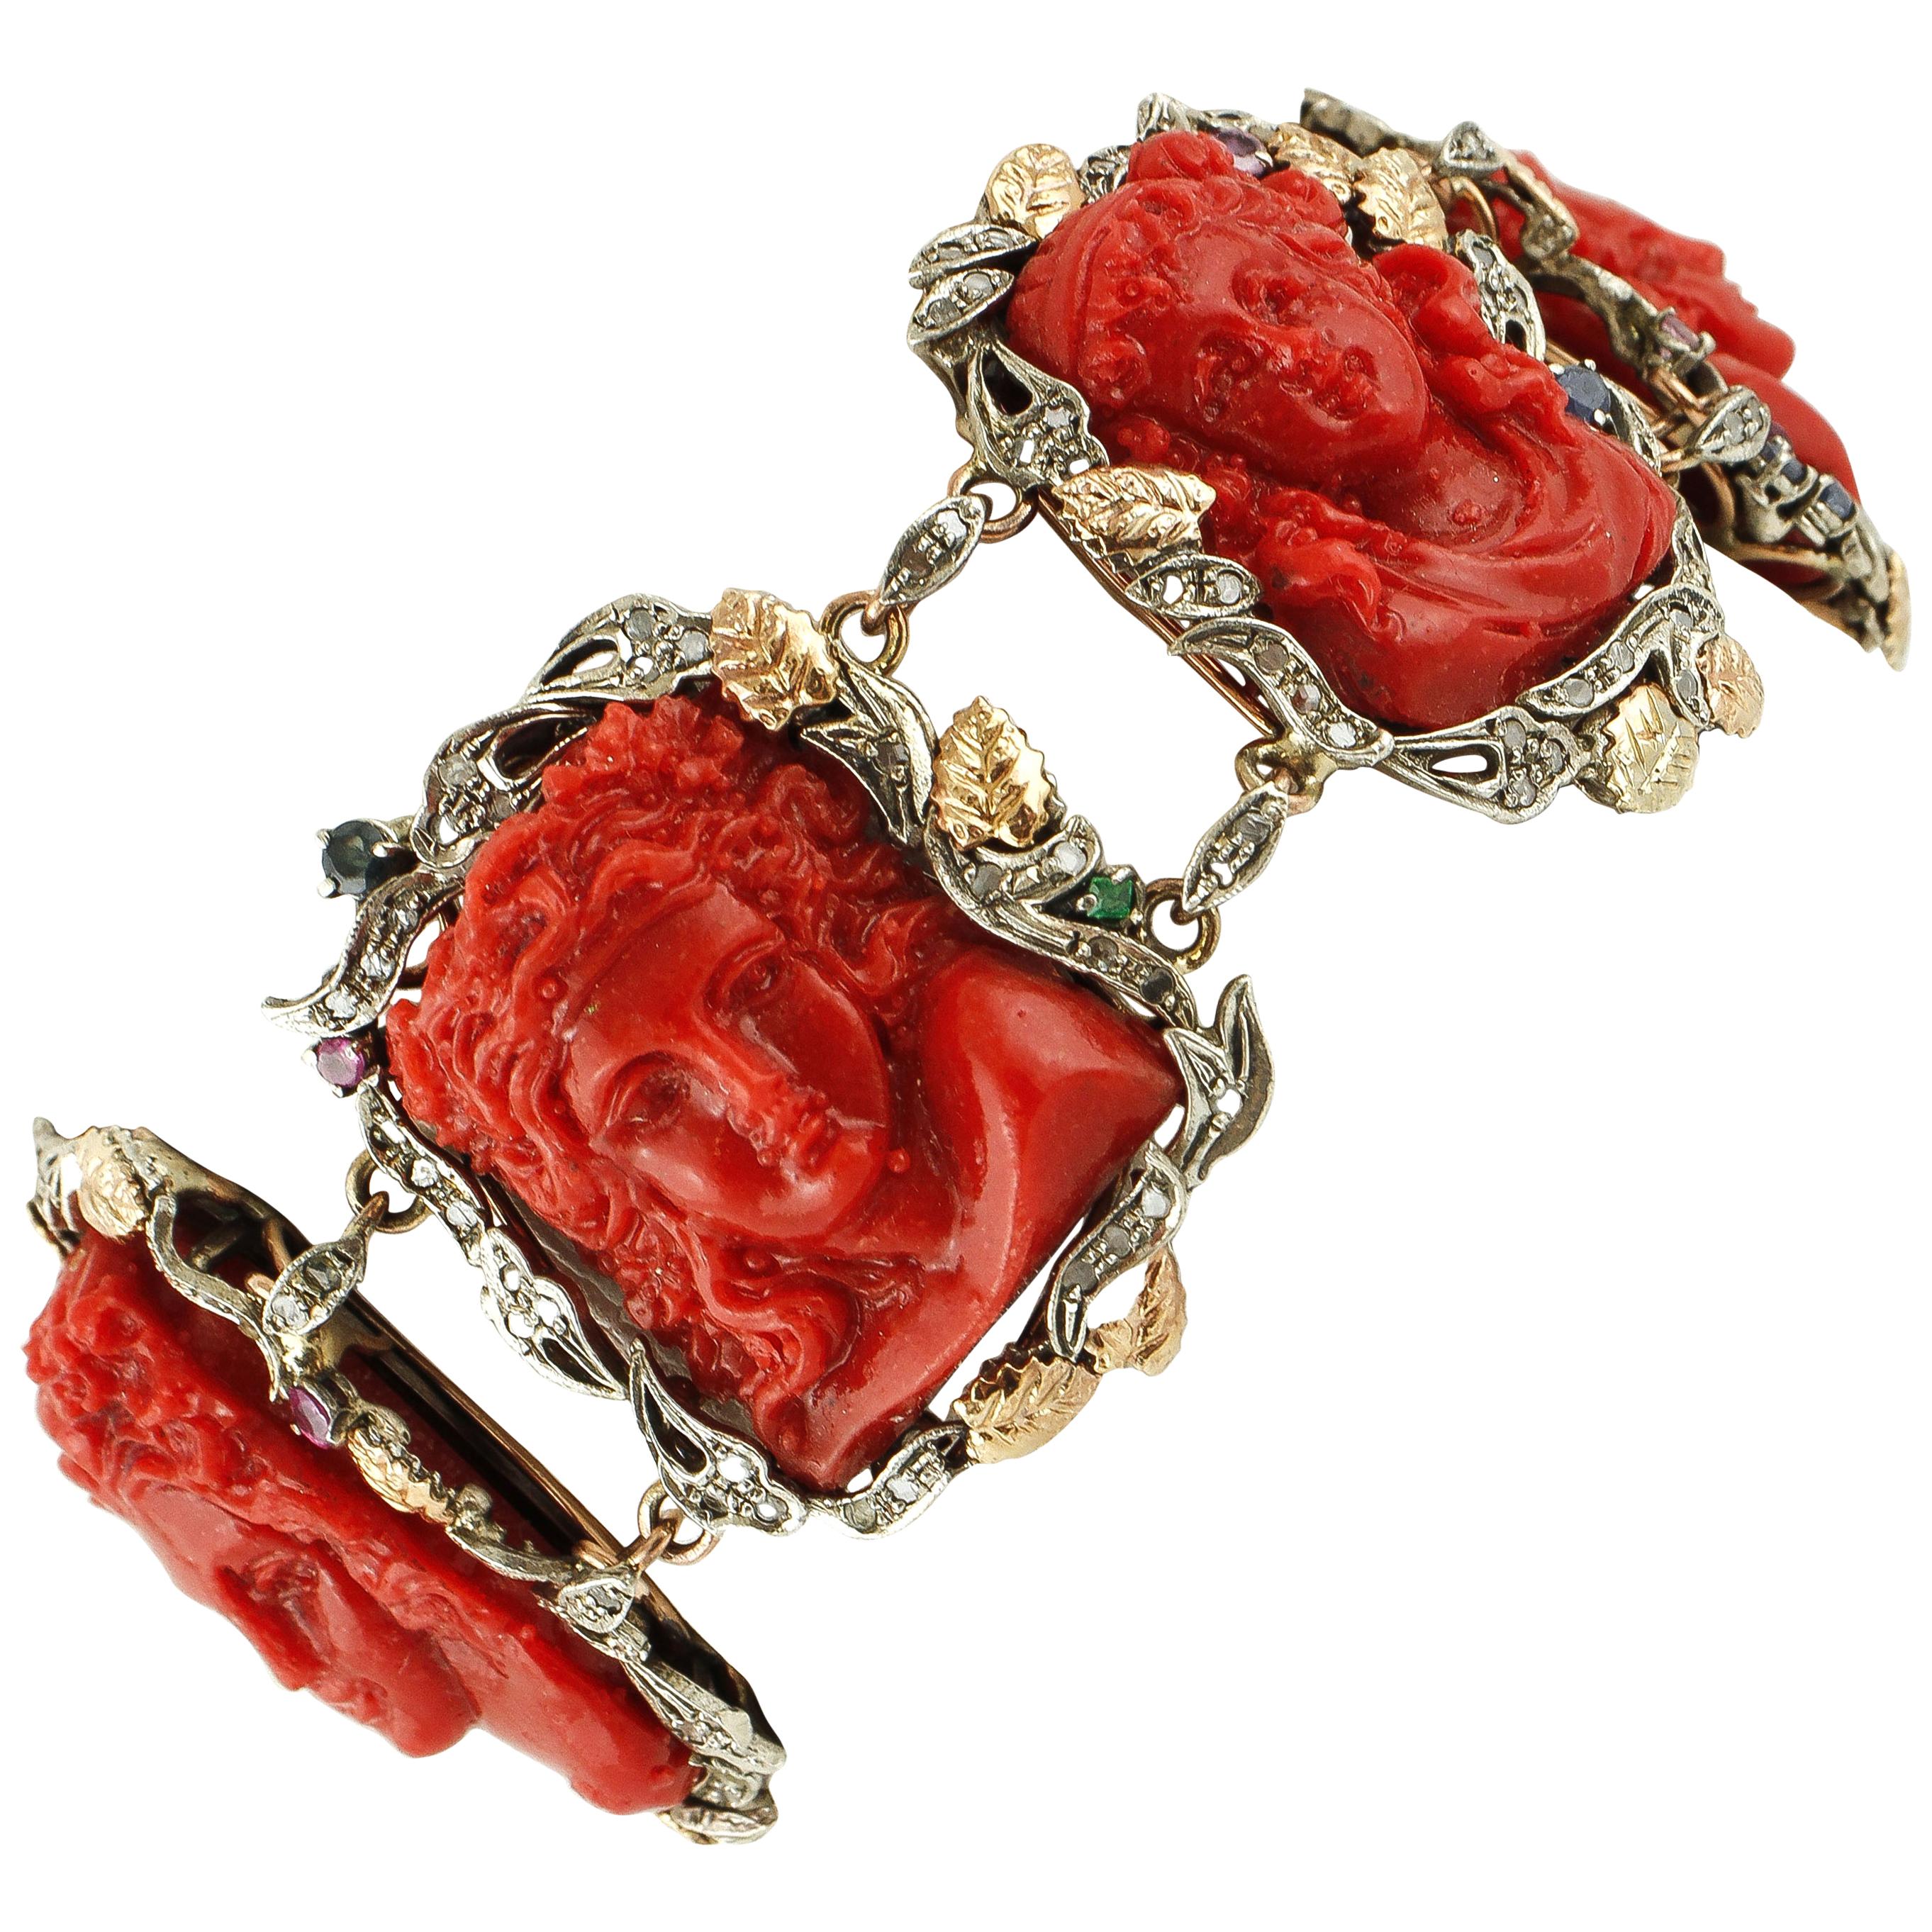 Engraved Faces on Red Coral, Diamonds, Rubies, Sapphires, Gold/Silver  Bracelet For Sale